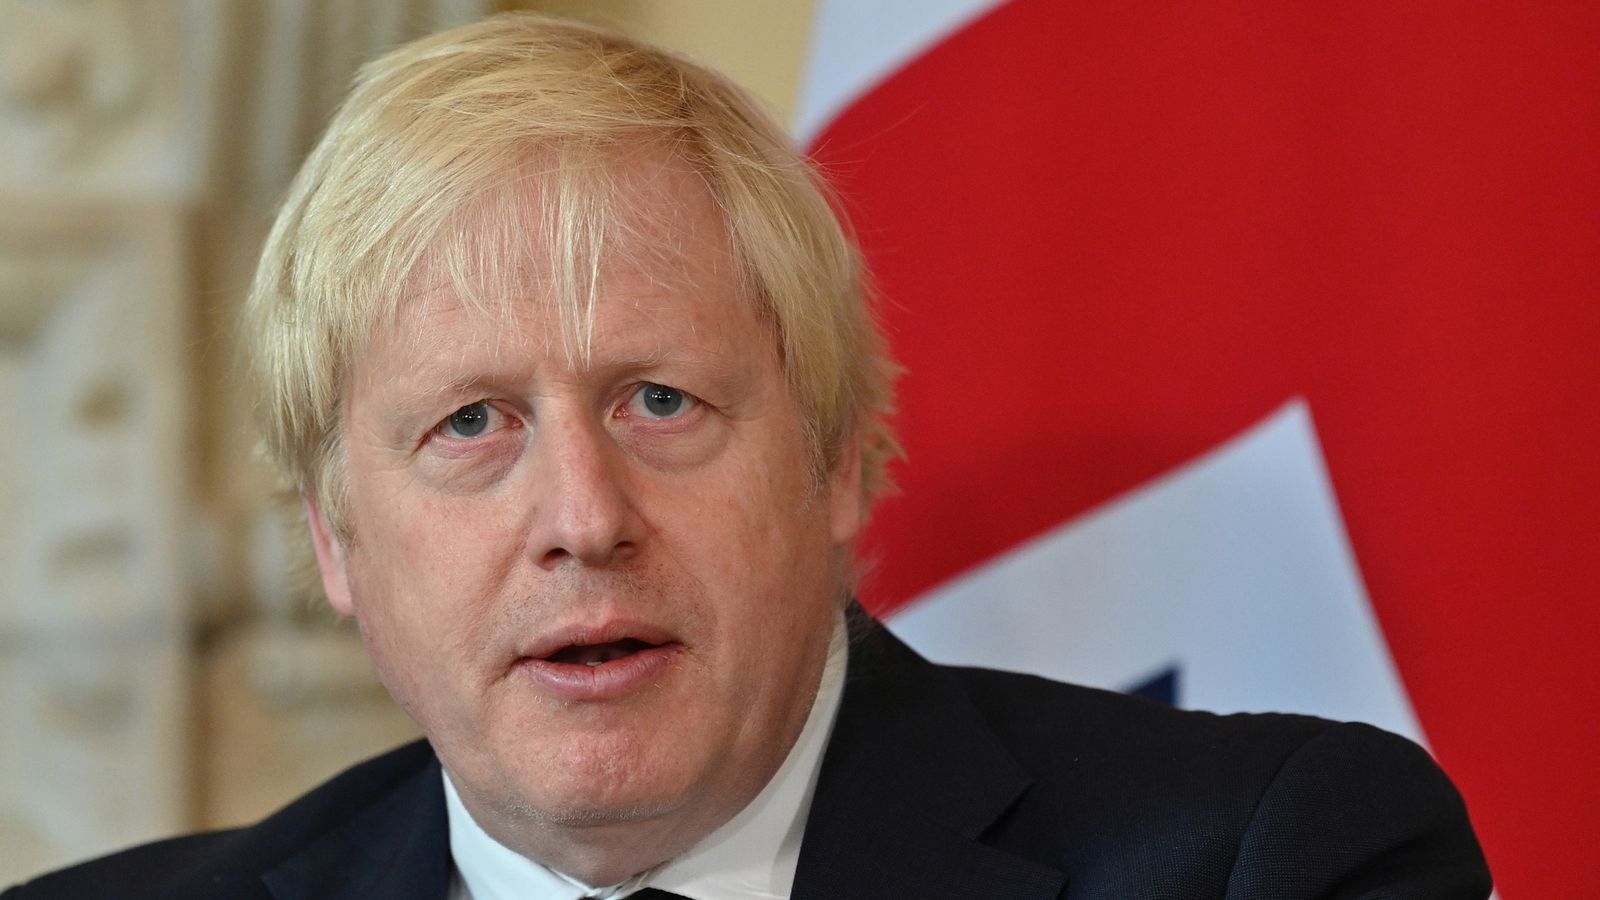 Boris Johnson says France needs to do more to tackle migrant crossings after more than 30 people die in dinghy sinking off Calais